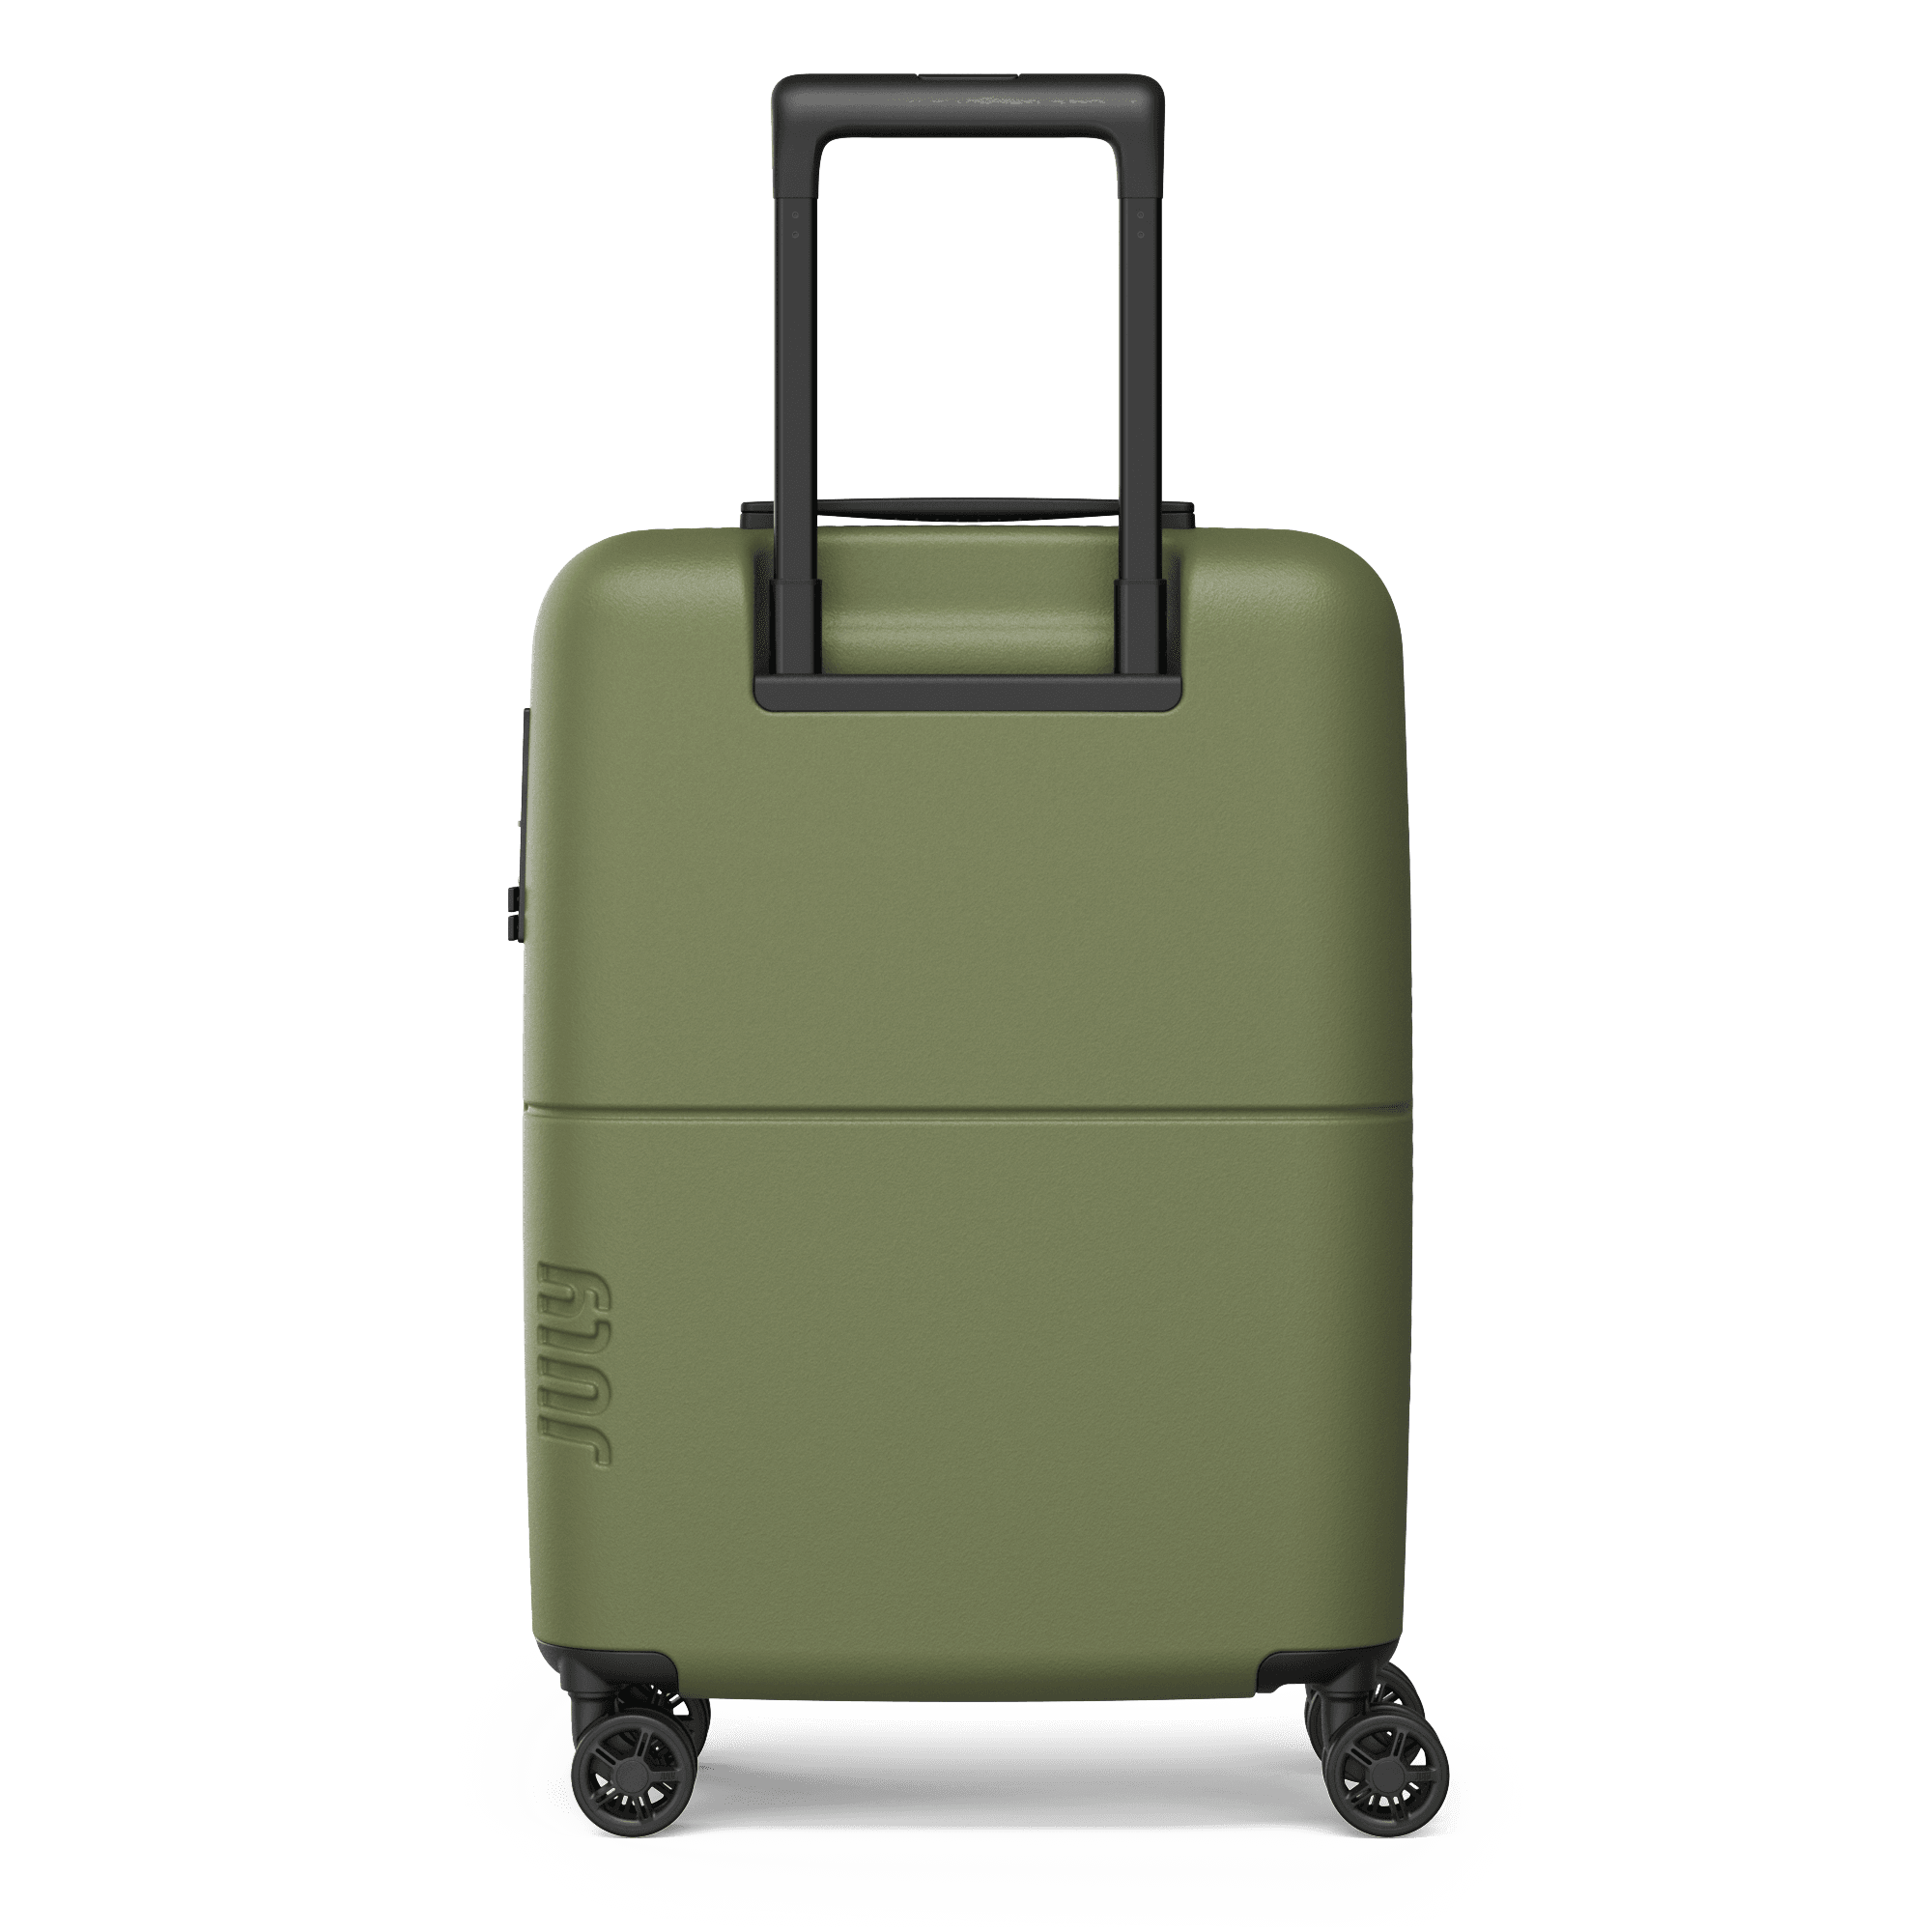 Carry On Light | Lightweight Carry On Luggage | July